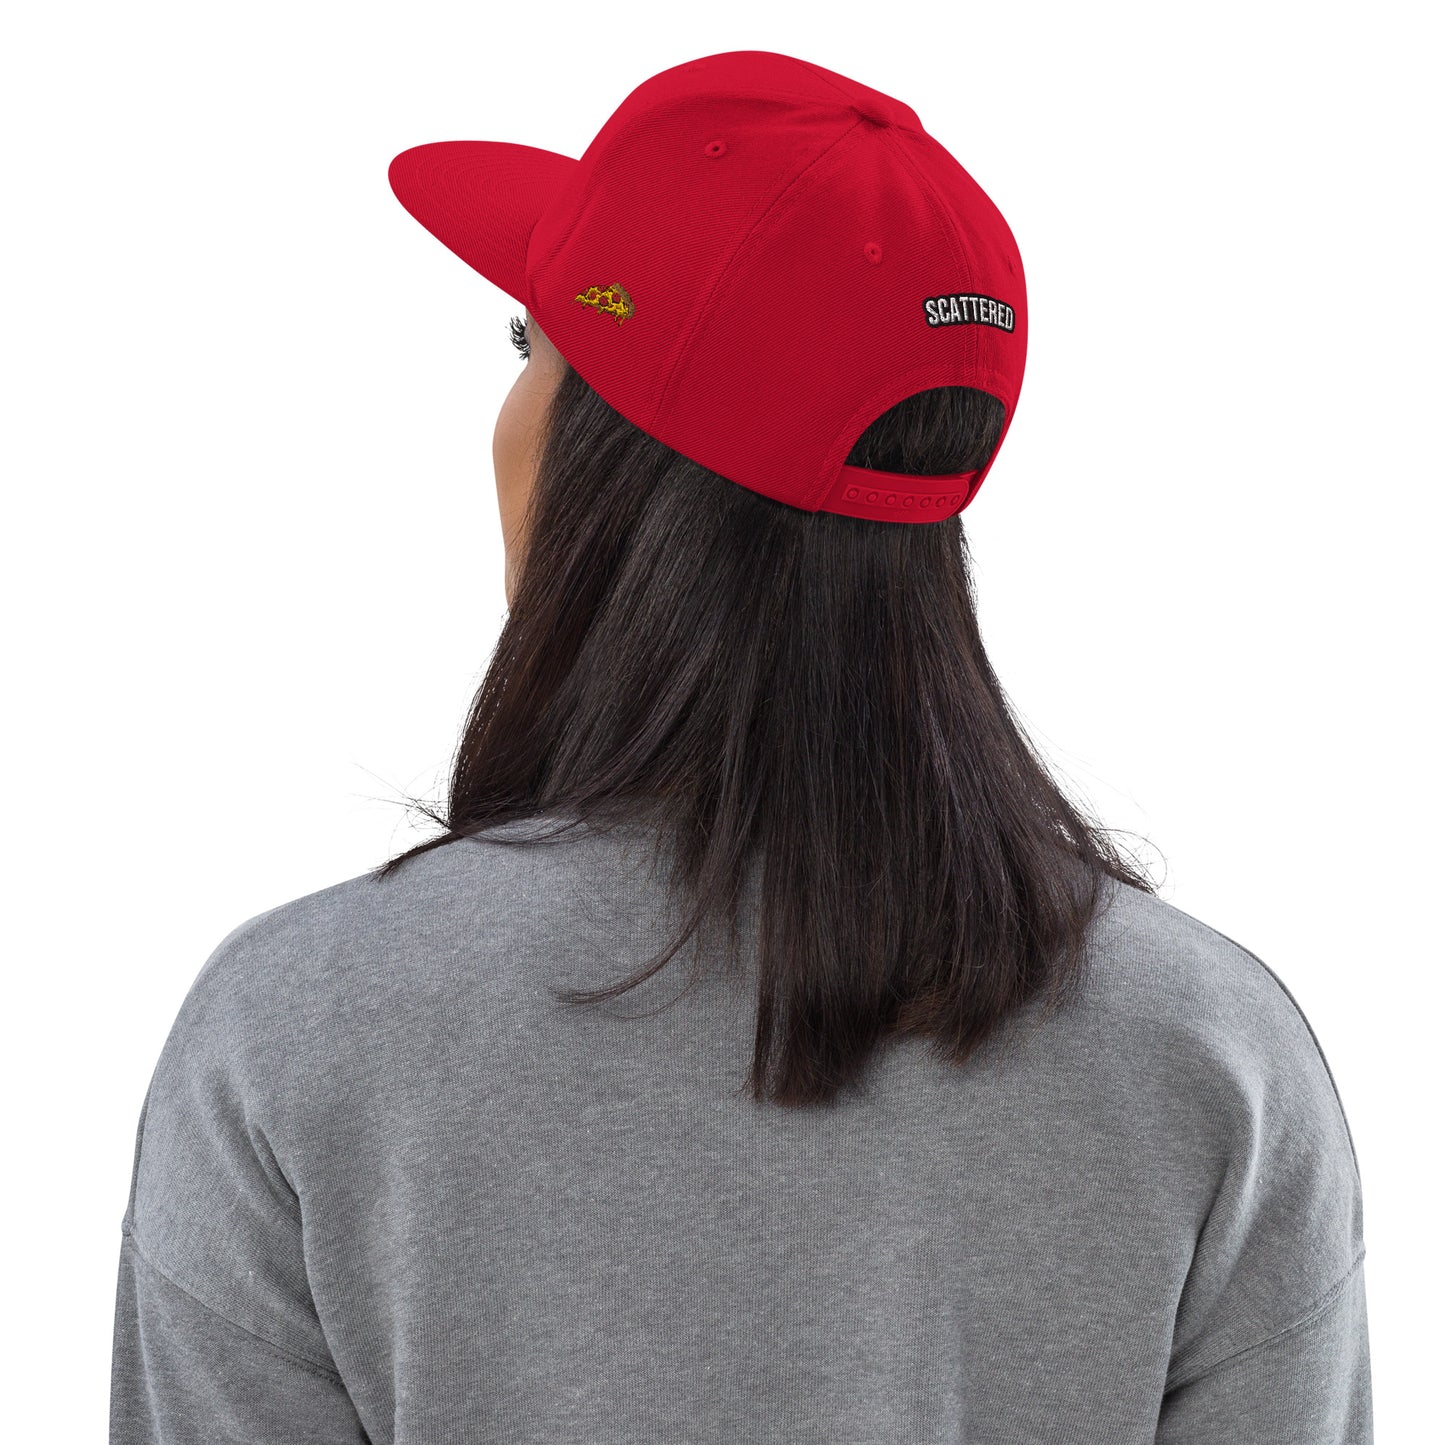 New York Apple Logo Embroidered Red Snapback Hat (Pizza) Scattered Streetwear